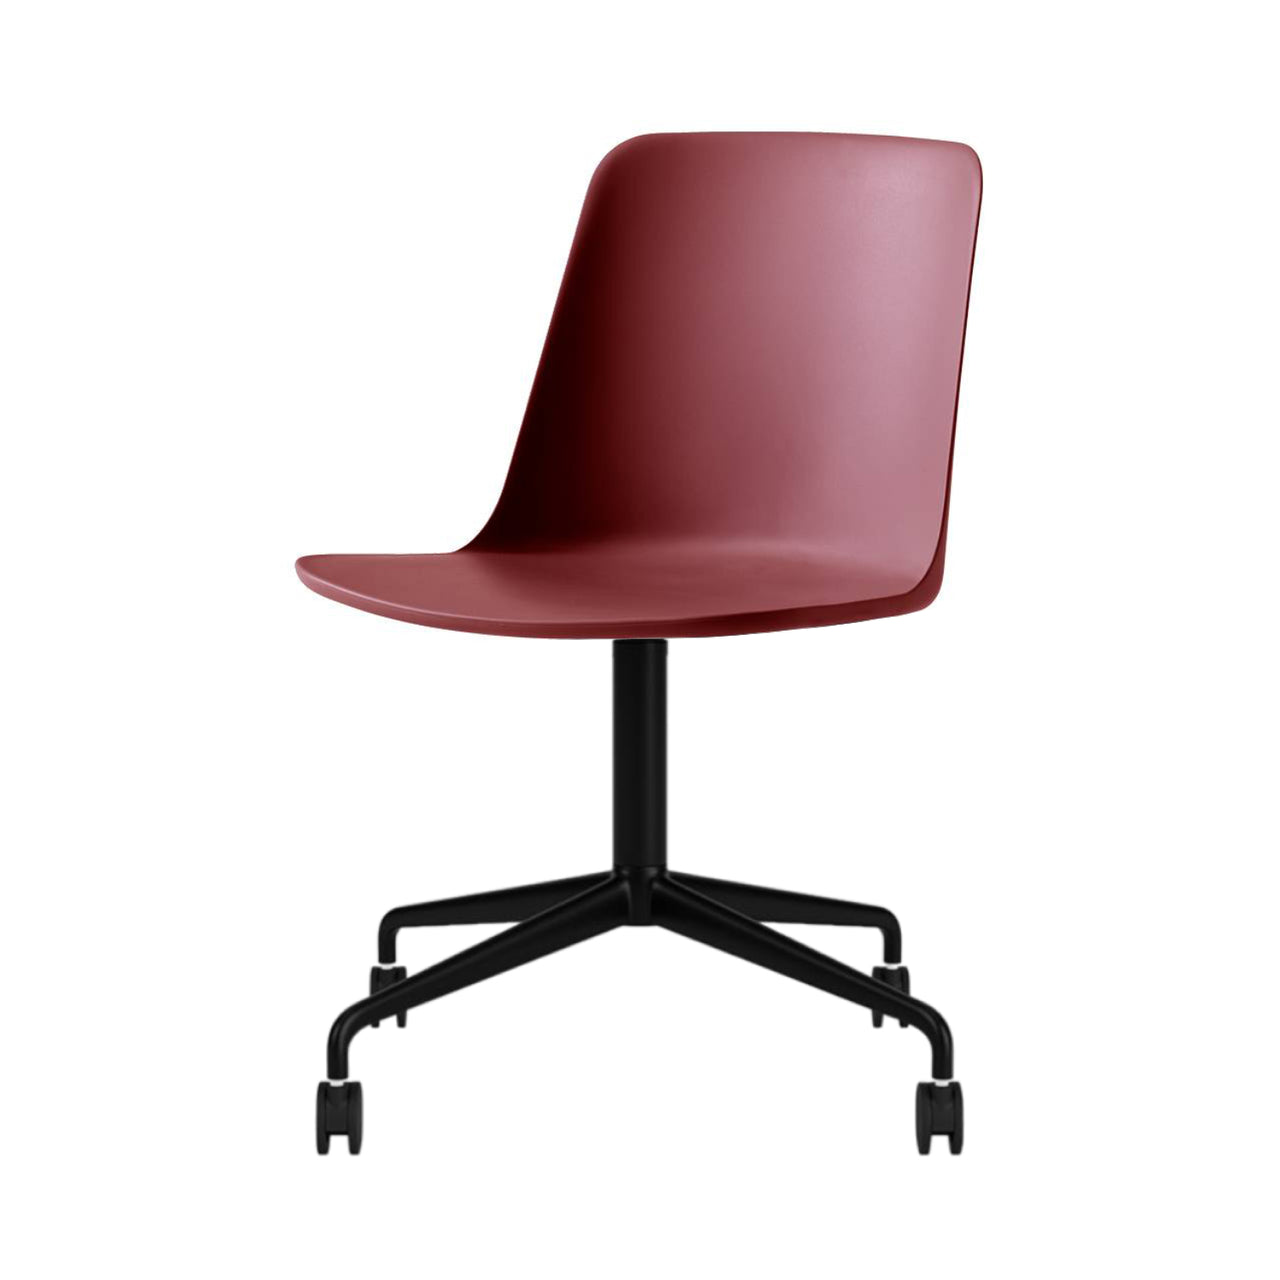 Rely Chair HW21: Red Brown + Black